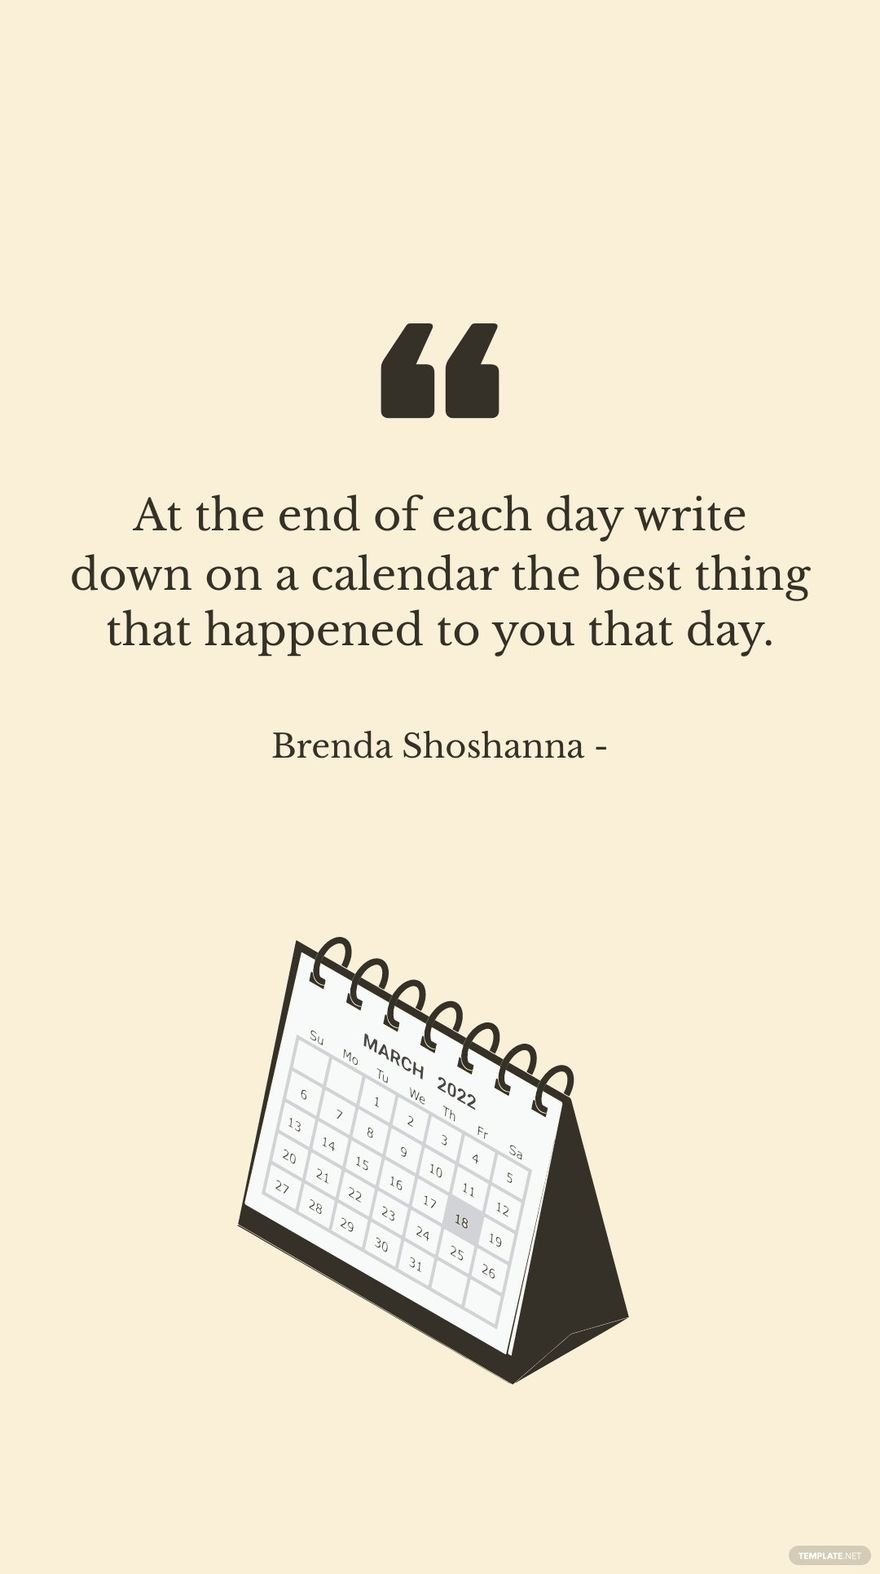 Free Brenda Shoshanna - At the end of each day write down on a calendar the best thing that happened to you that day. in JPG